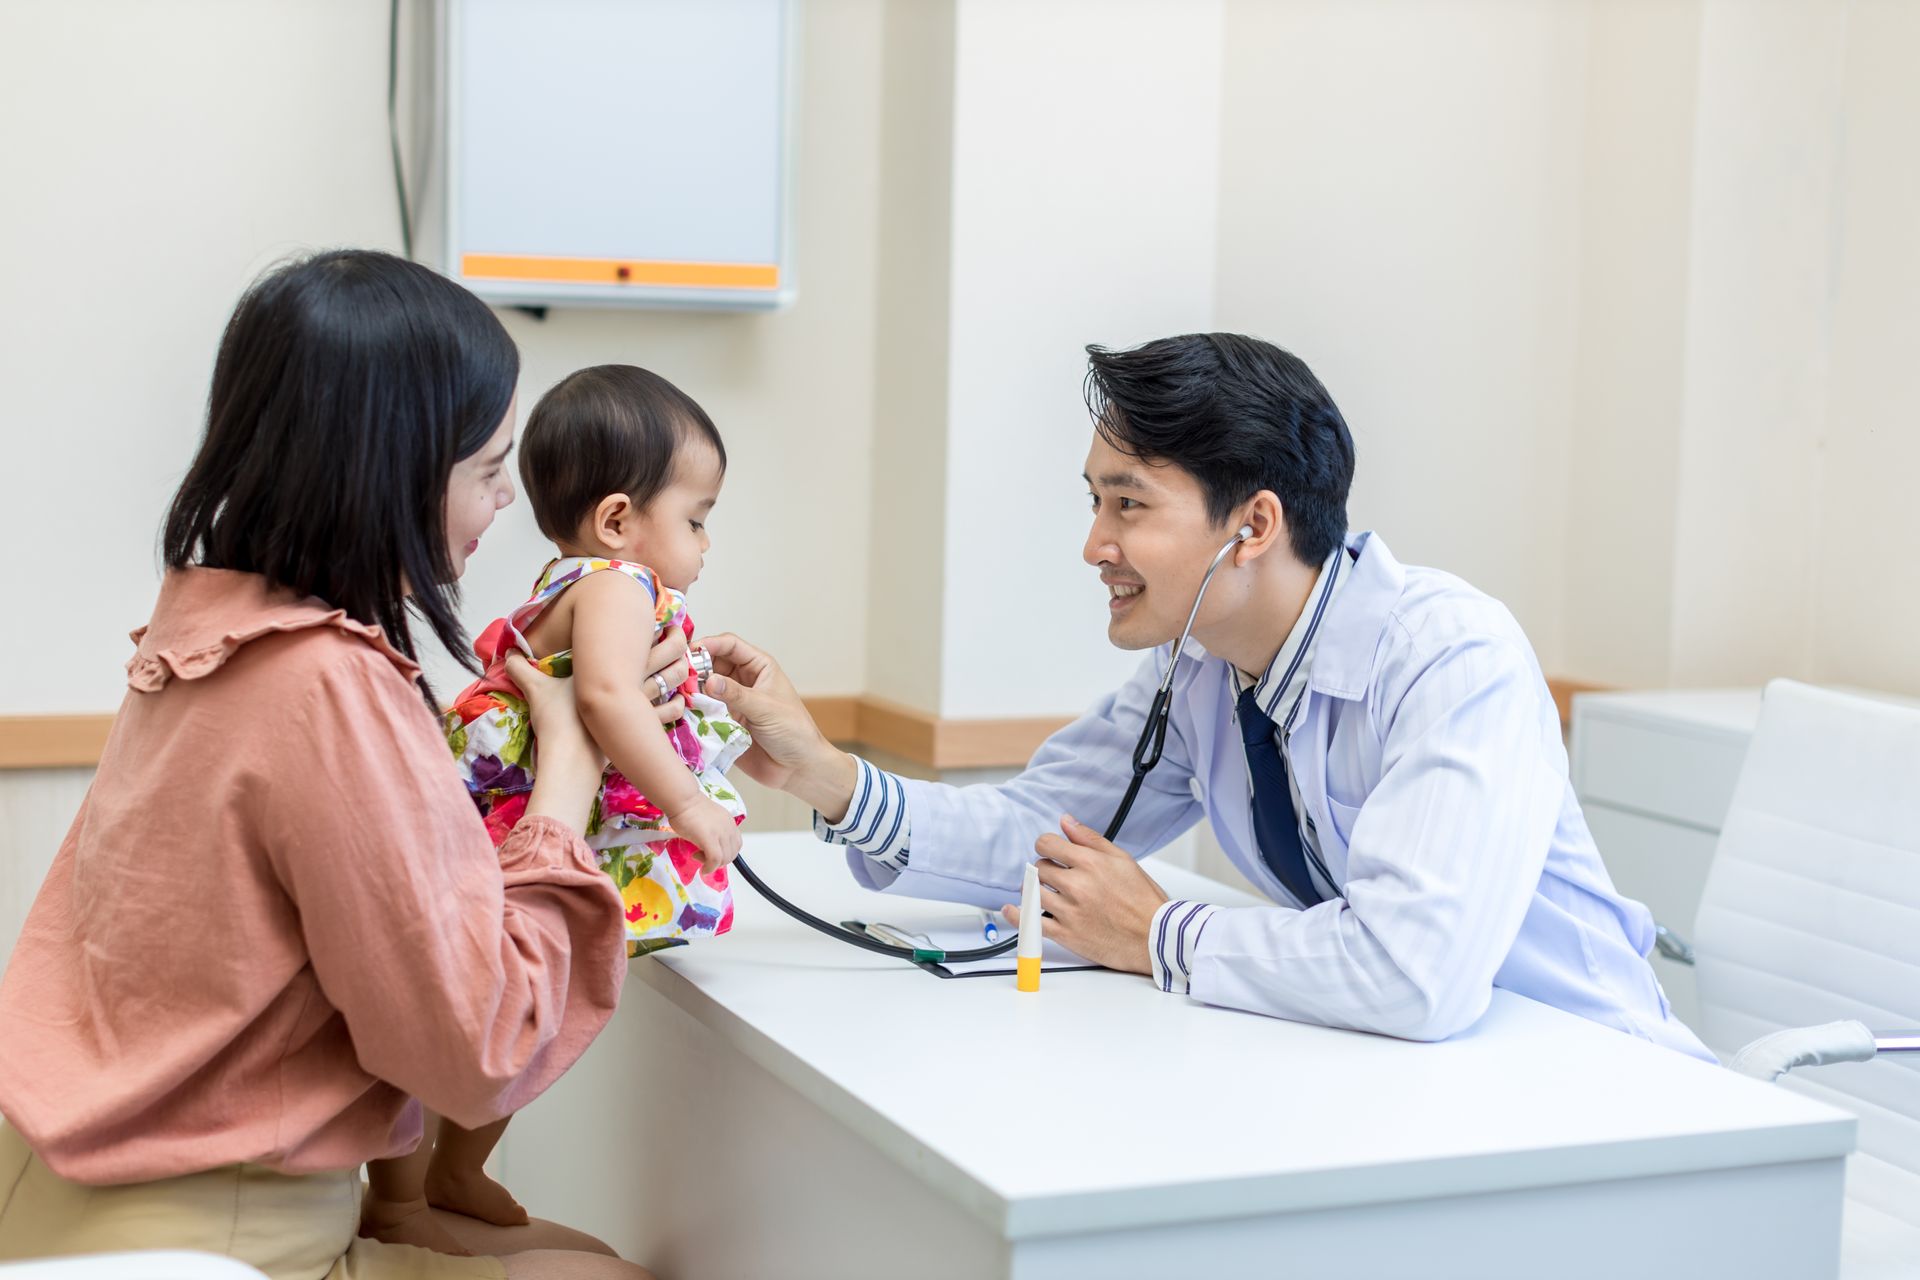 A Parent's Guide: Why Annual Wellness Checkups Matter for Kids